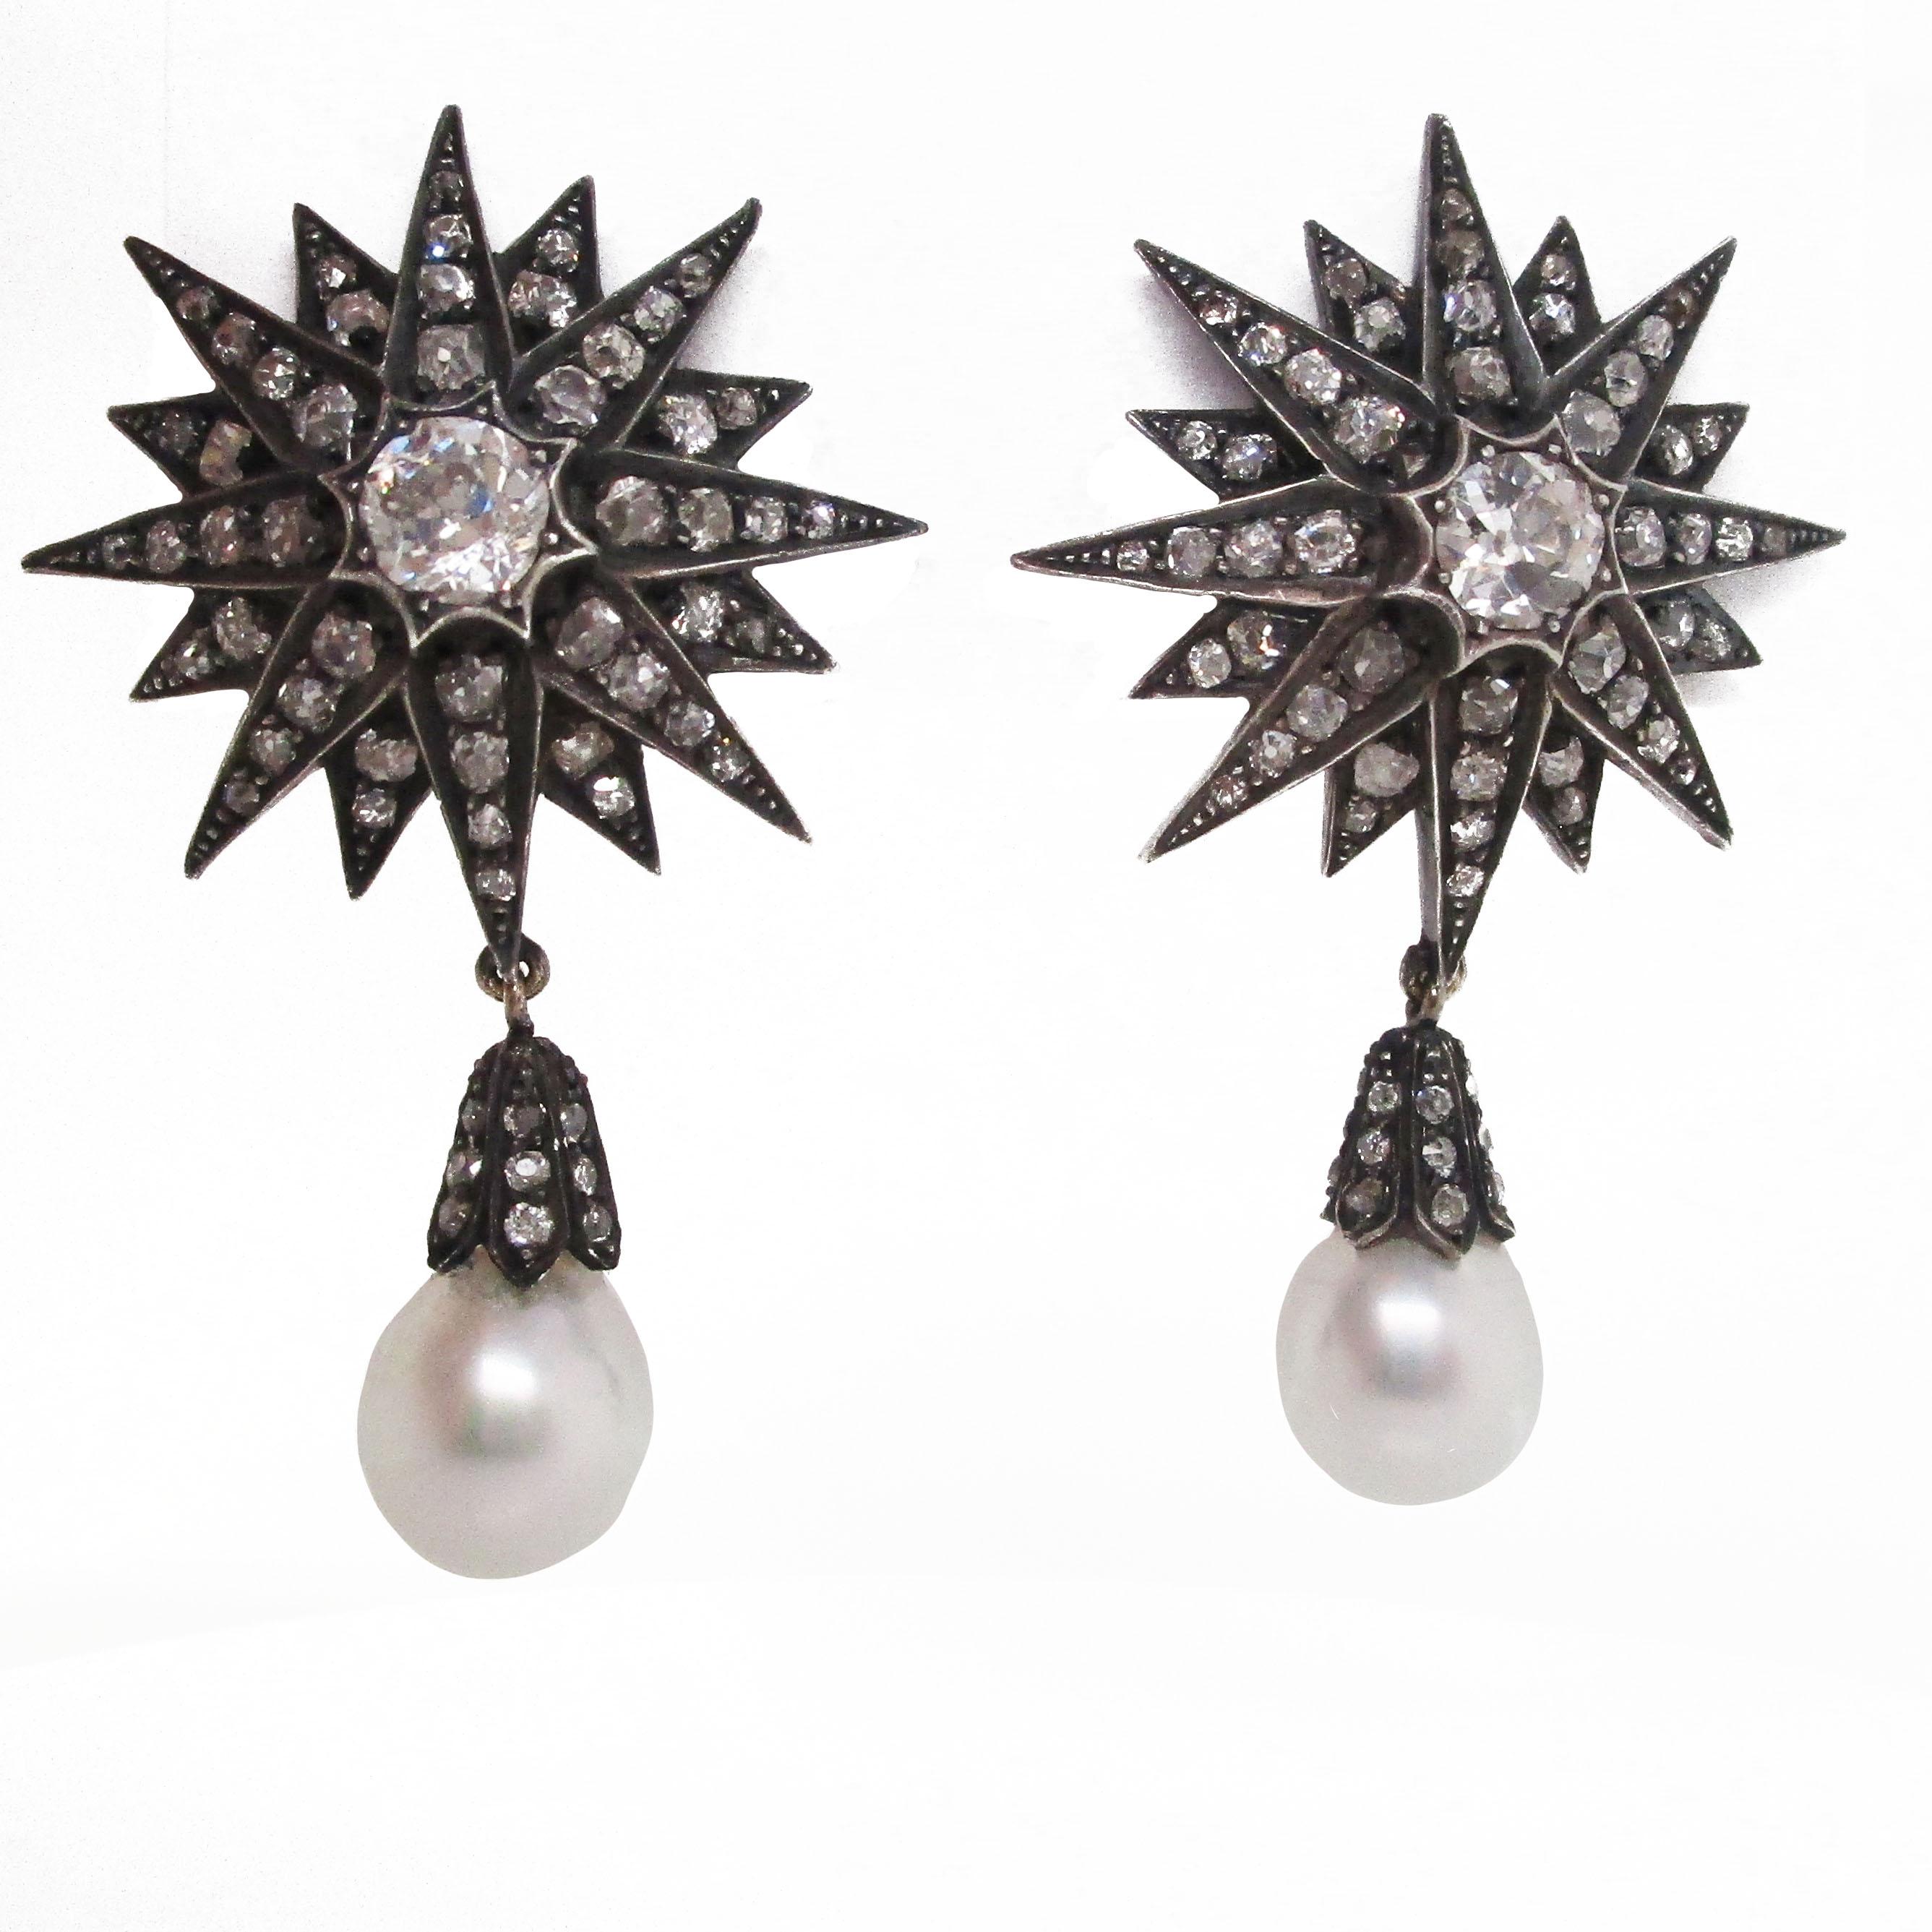 These absolutely knockout earrings are from the Victorian Era and feature a staggering 14 carats of old mine-cut diamonds in silver over gold starburst-shaped earrings. The top of the earrings features a sprawling star design with layered ‘arms’ of